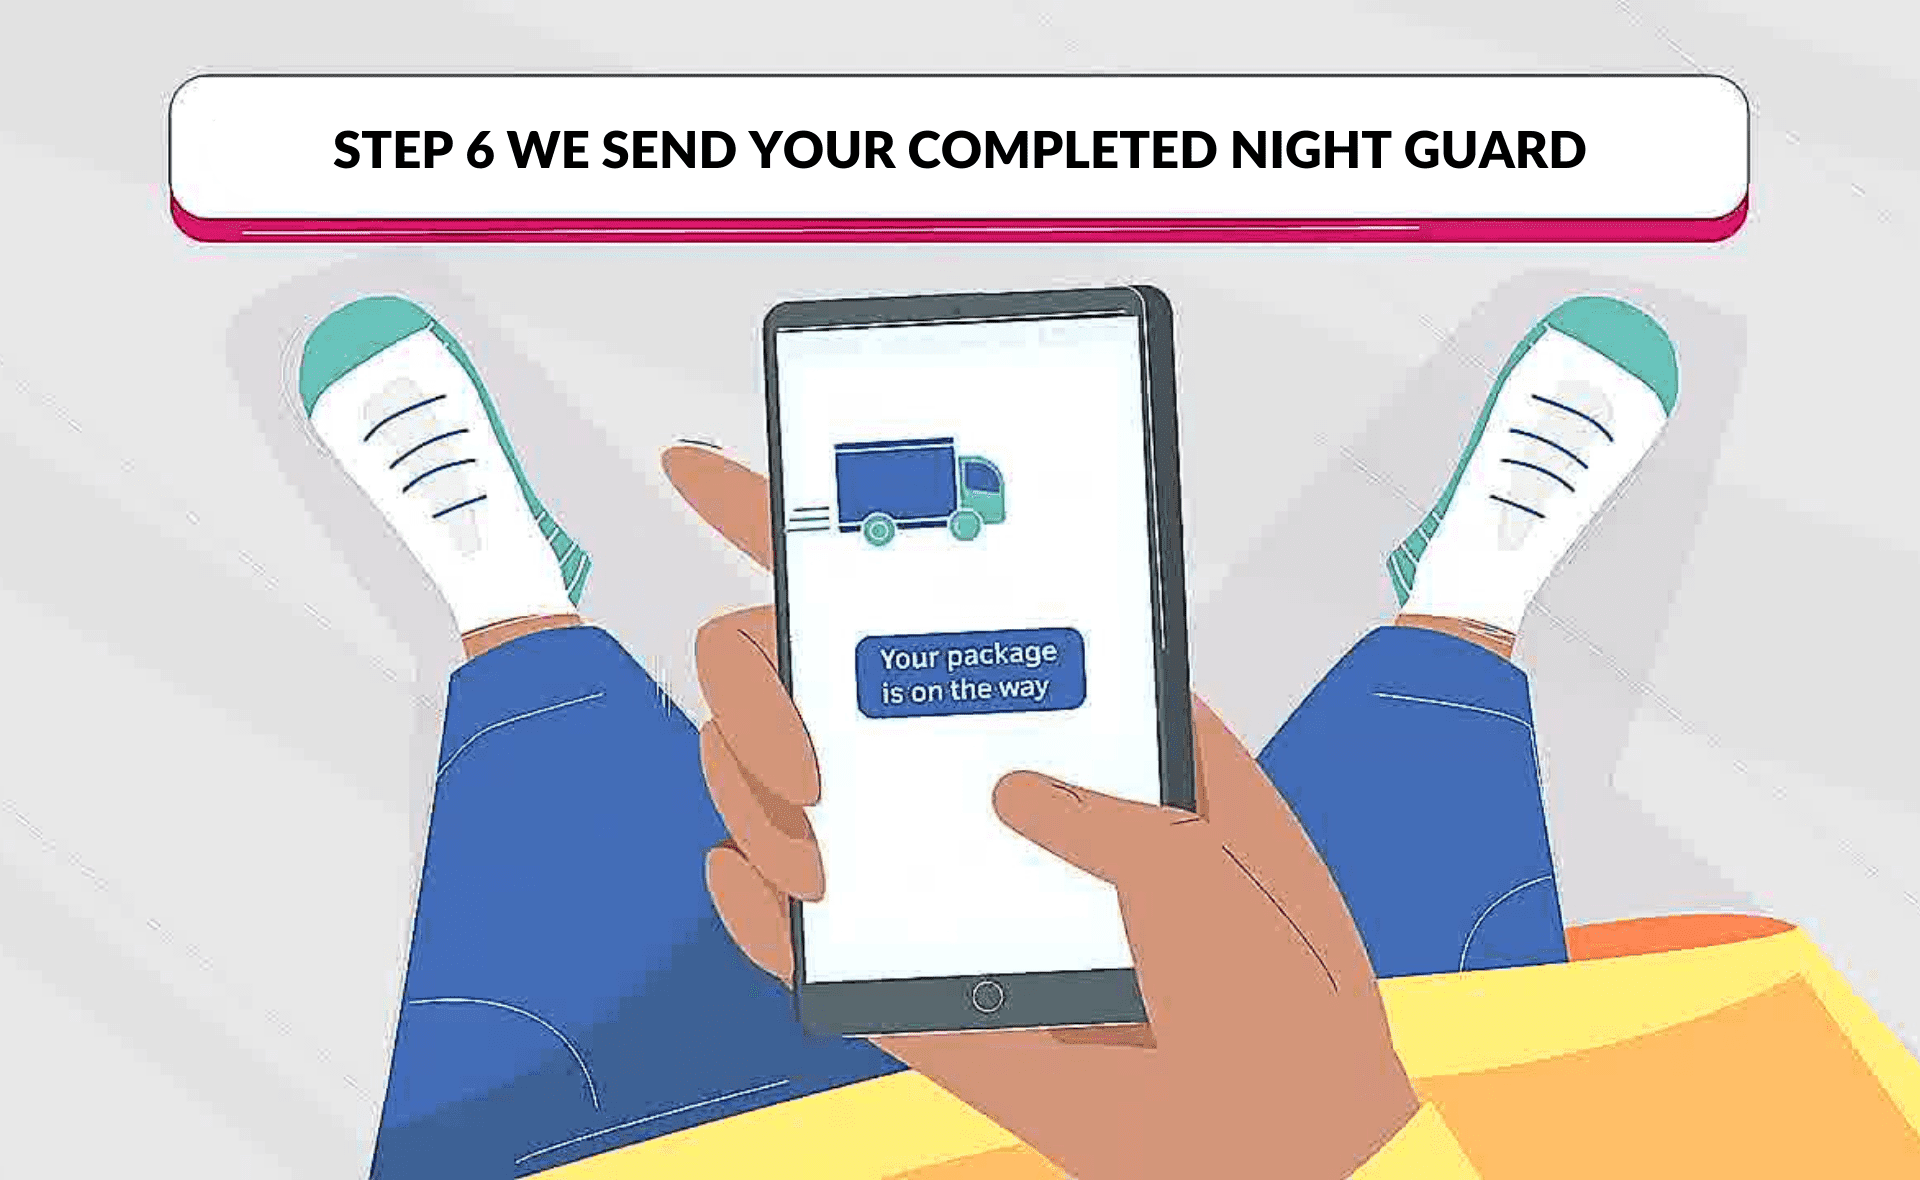 Step 6: We Send Your Completed Night Guard